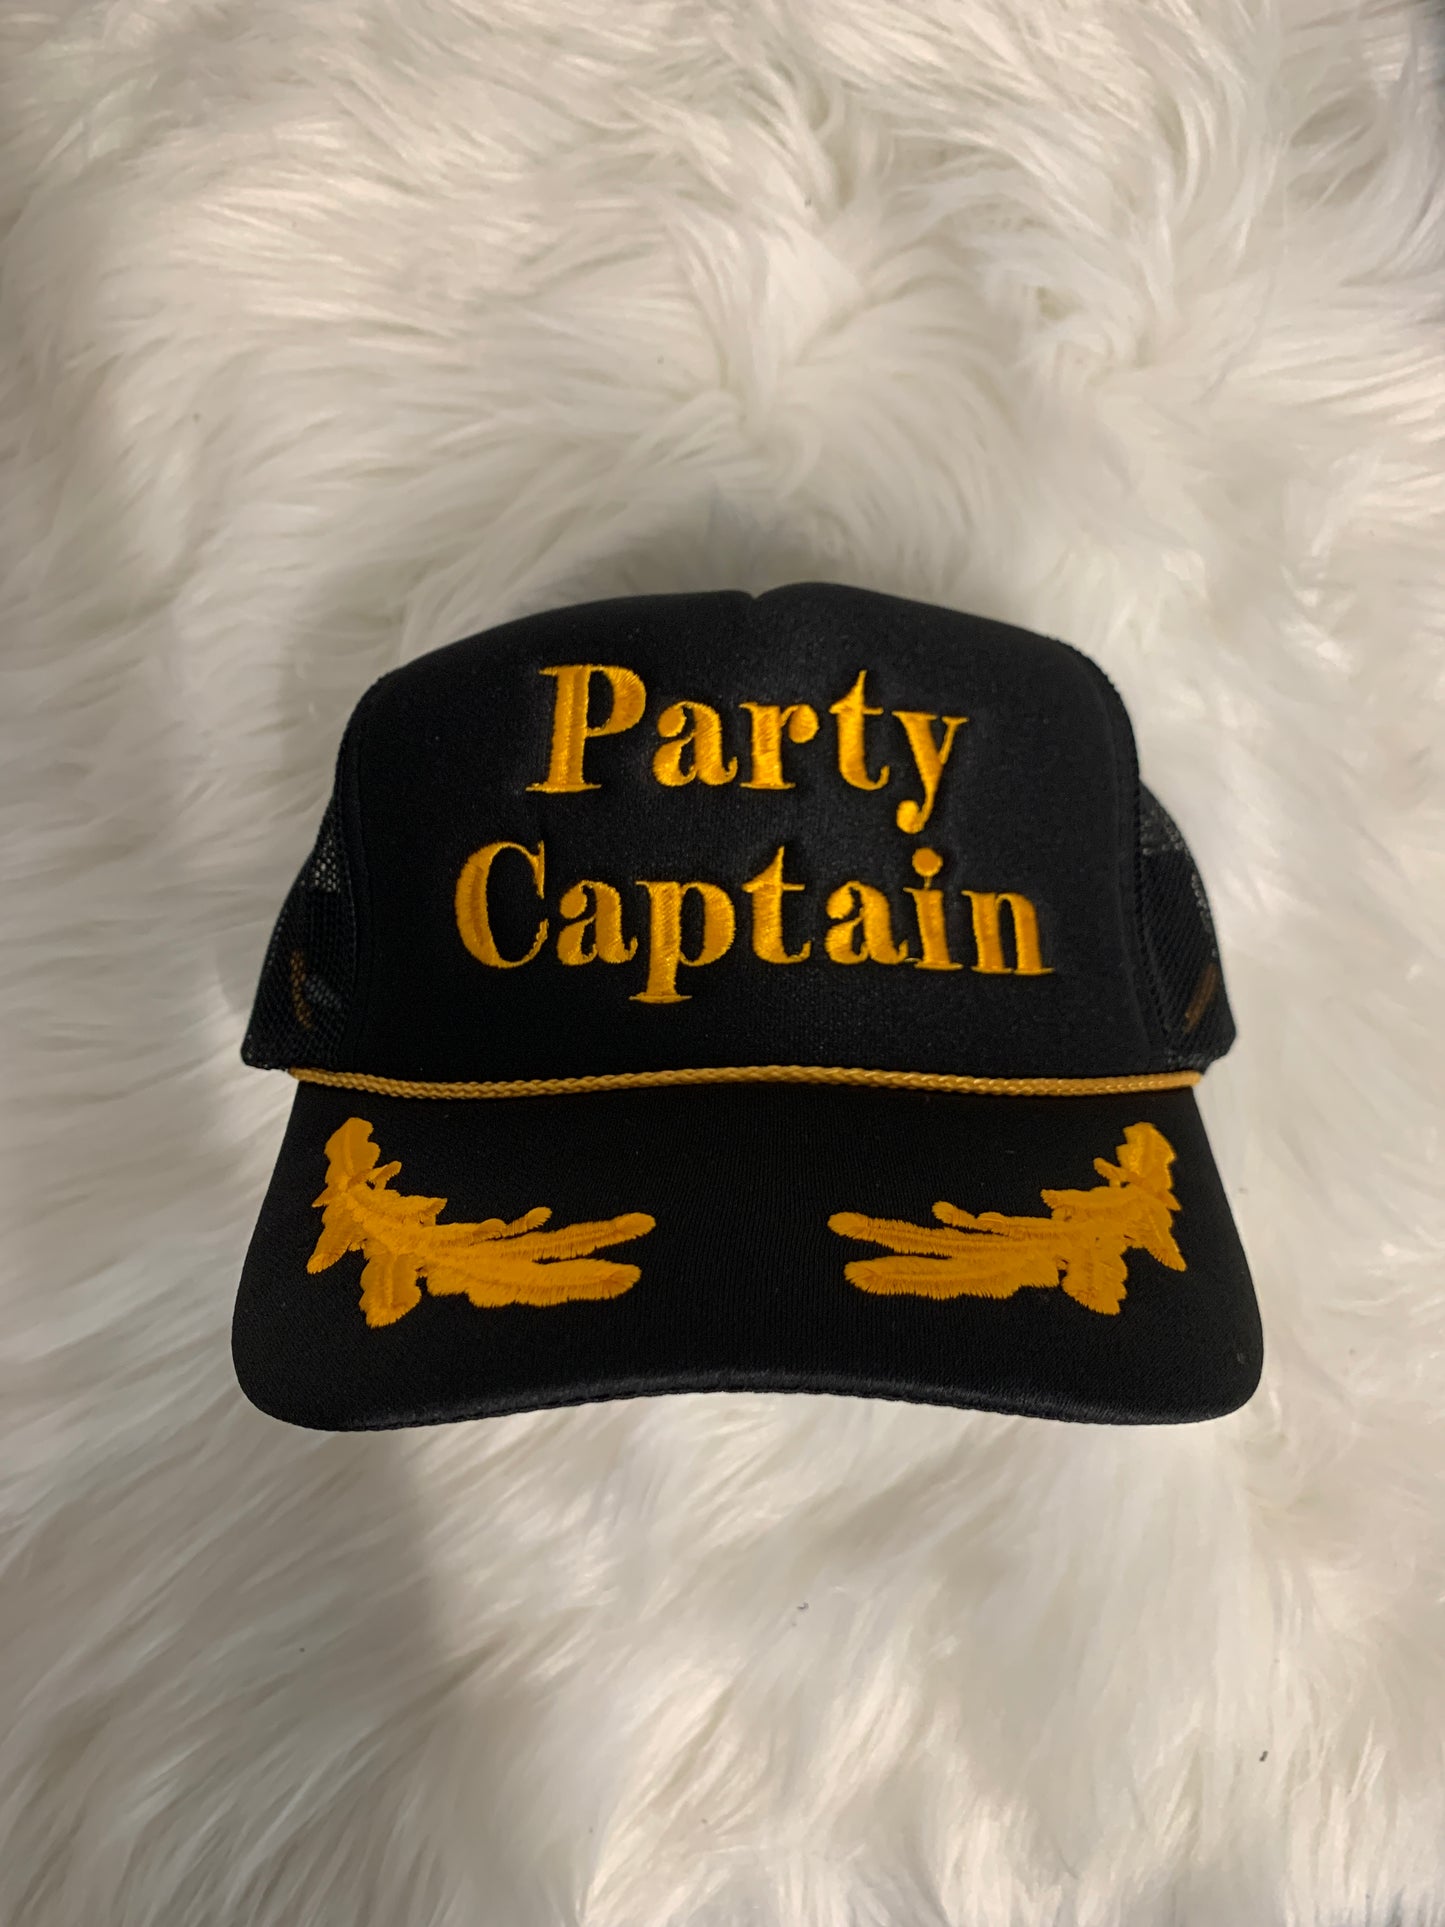 Party Captain Embroidered Trucker Hat